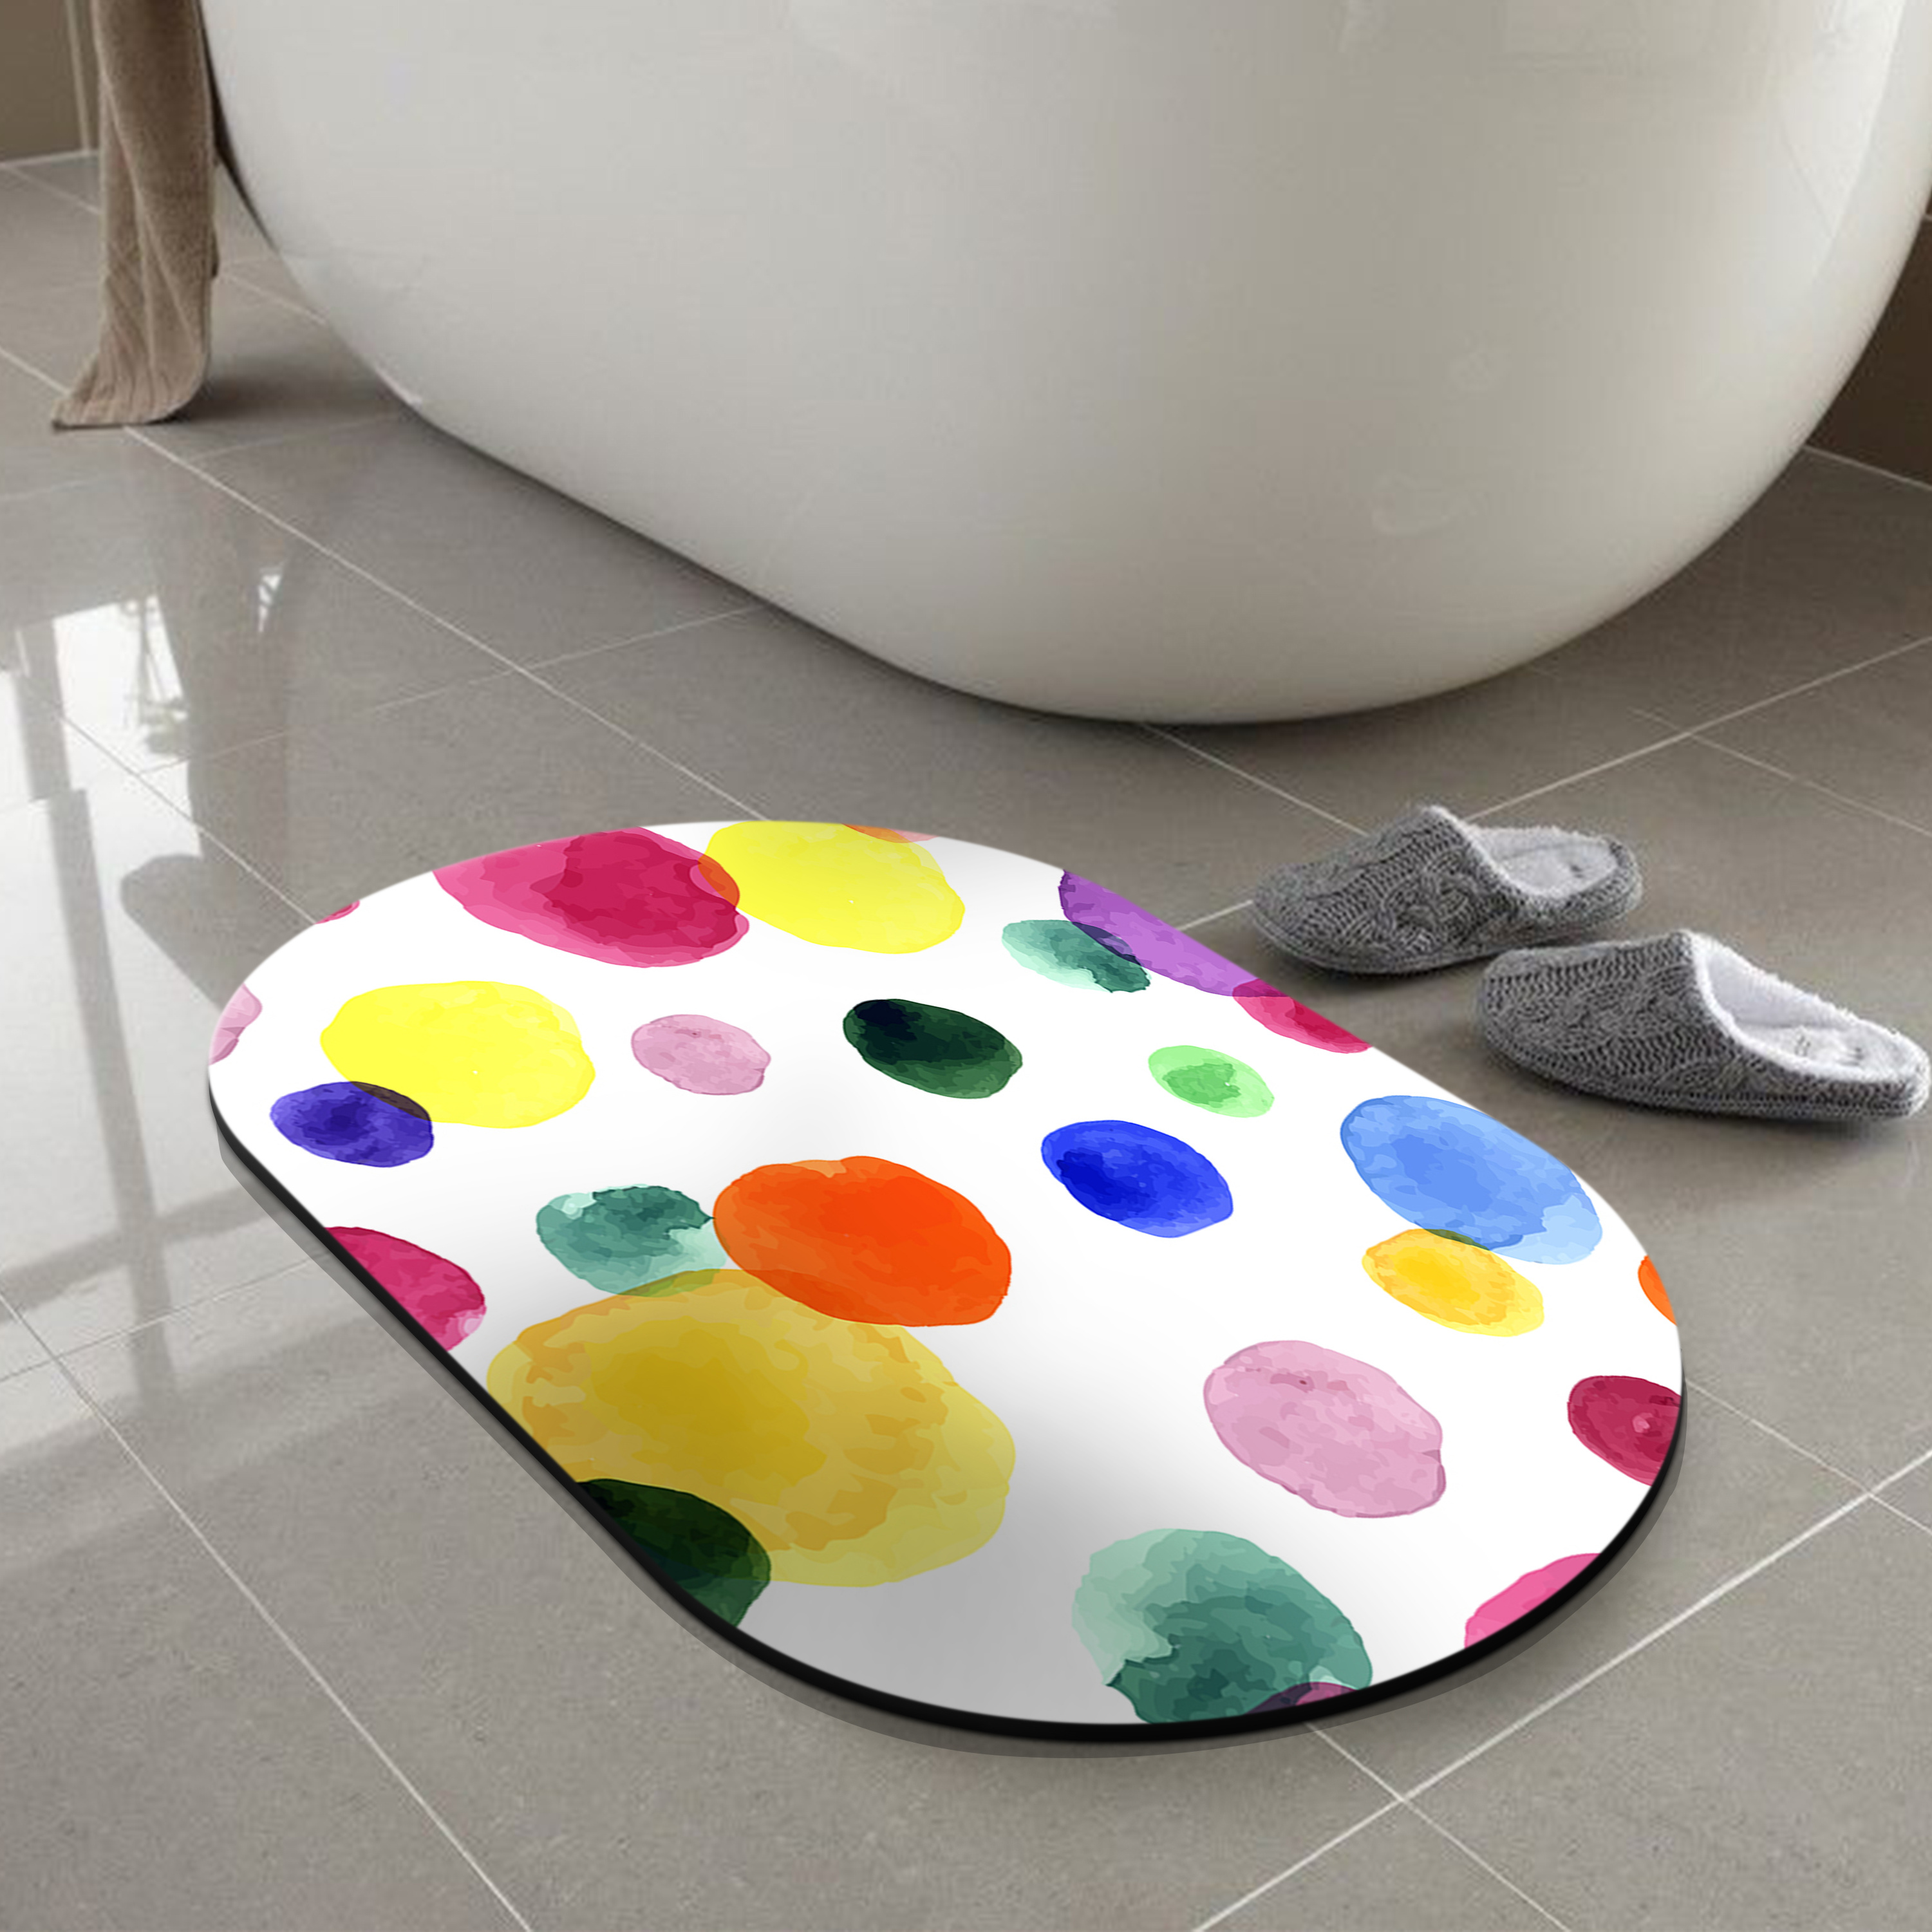 Diatom Mud Bathroom Anti-slip Mat, Mexican Colored Floral Super Absorbent Outdoor  Doormat With Non-slip Rubber Backing, Geometric Abstract Floral Texture  Bath Mat, Porch Entrance Shoes Boots Entrance Floor Mat Carpet, Home Decor